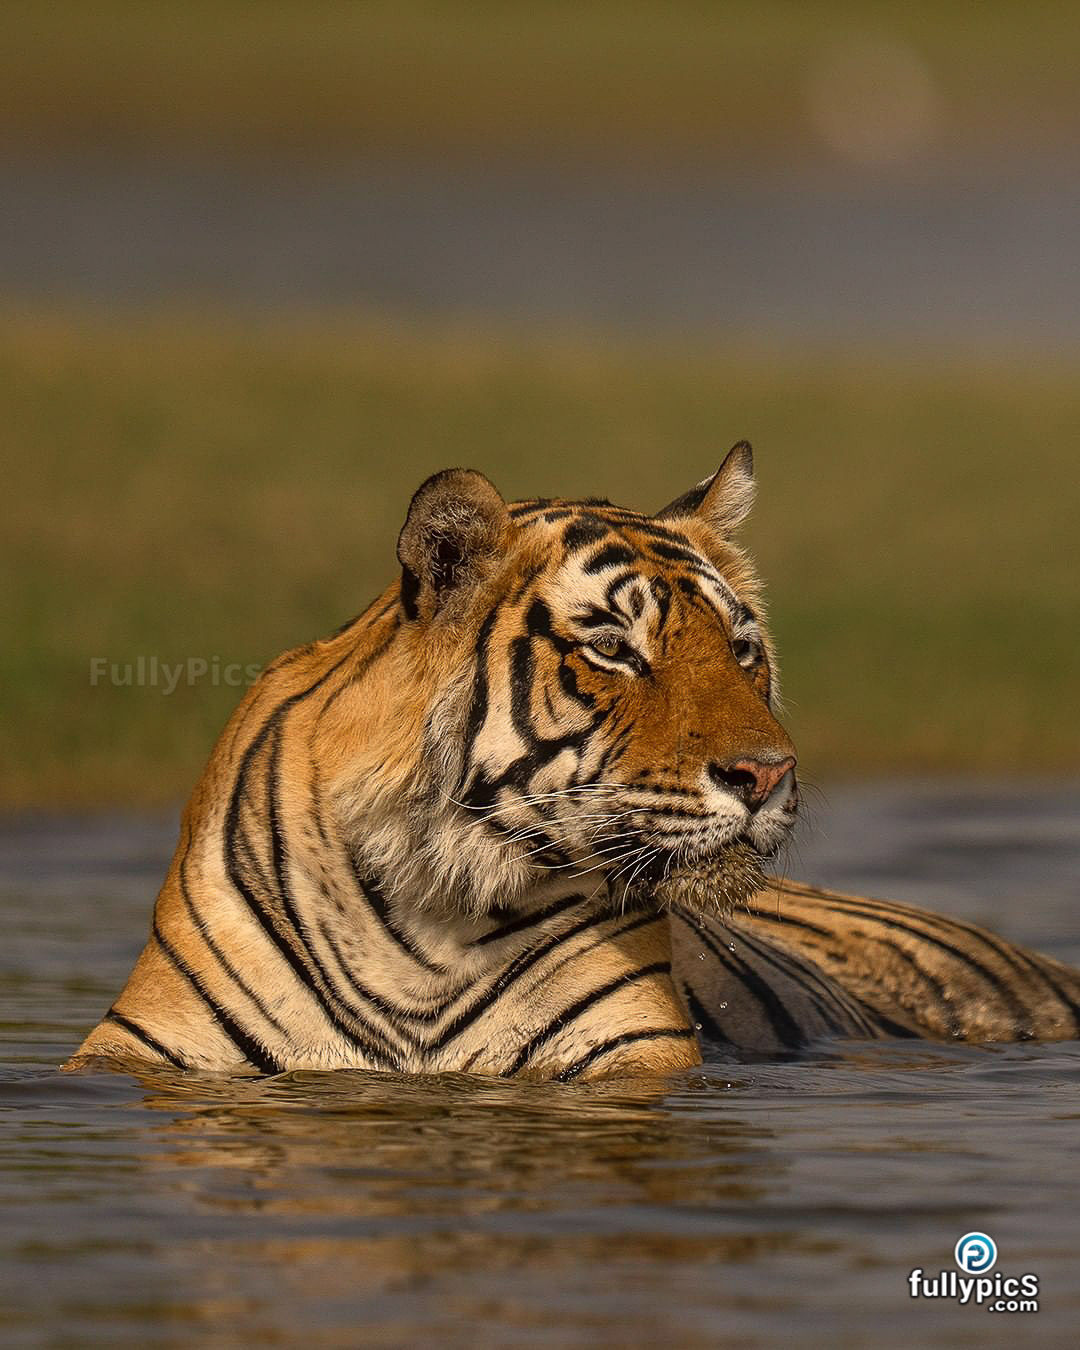 Tiger HD Picture Gallery